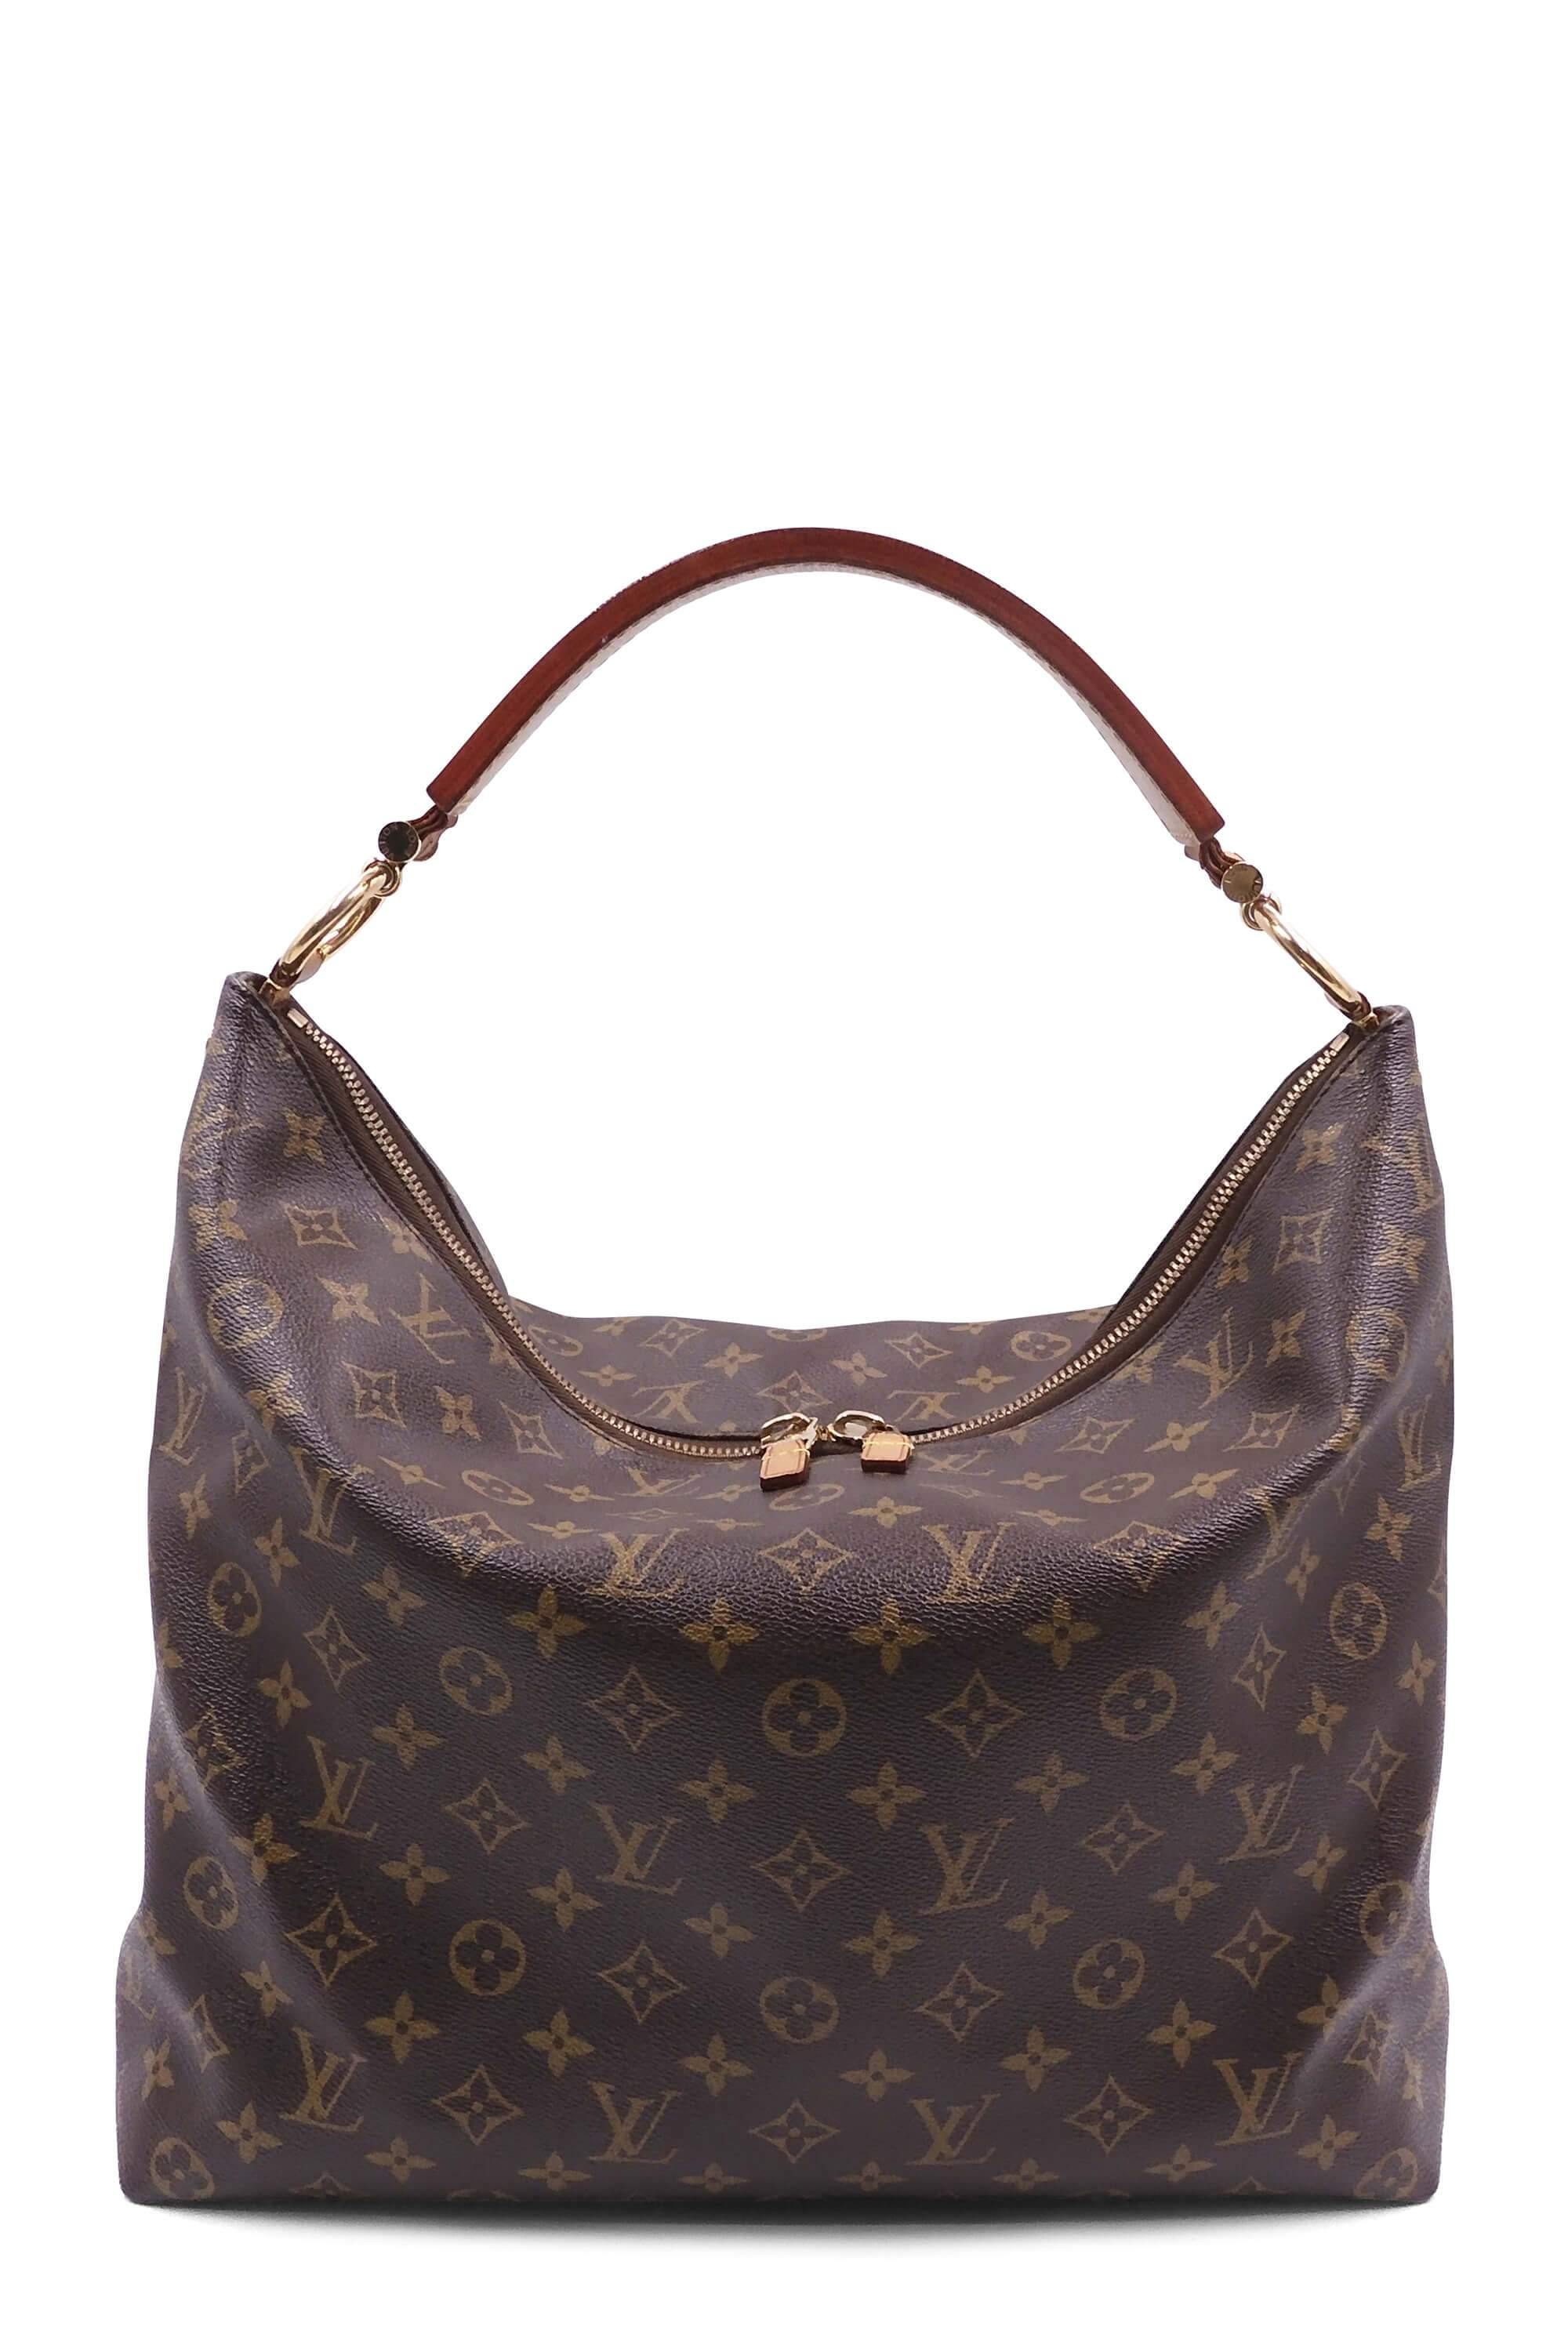 Buy Authentic, Preloved Louis Vuitton Monogram Sully MM Brown Bags